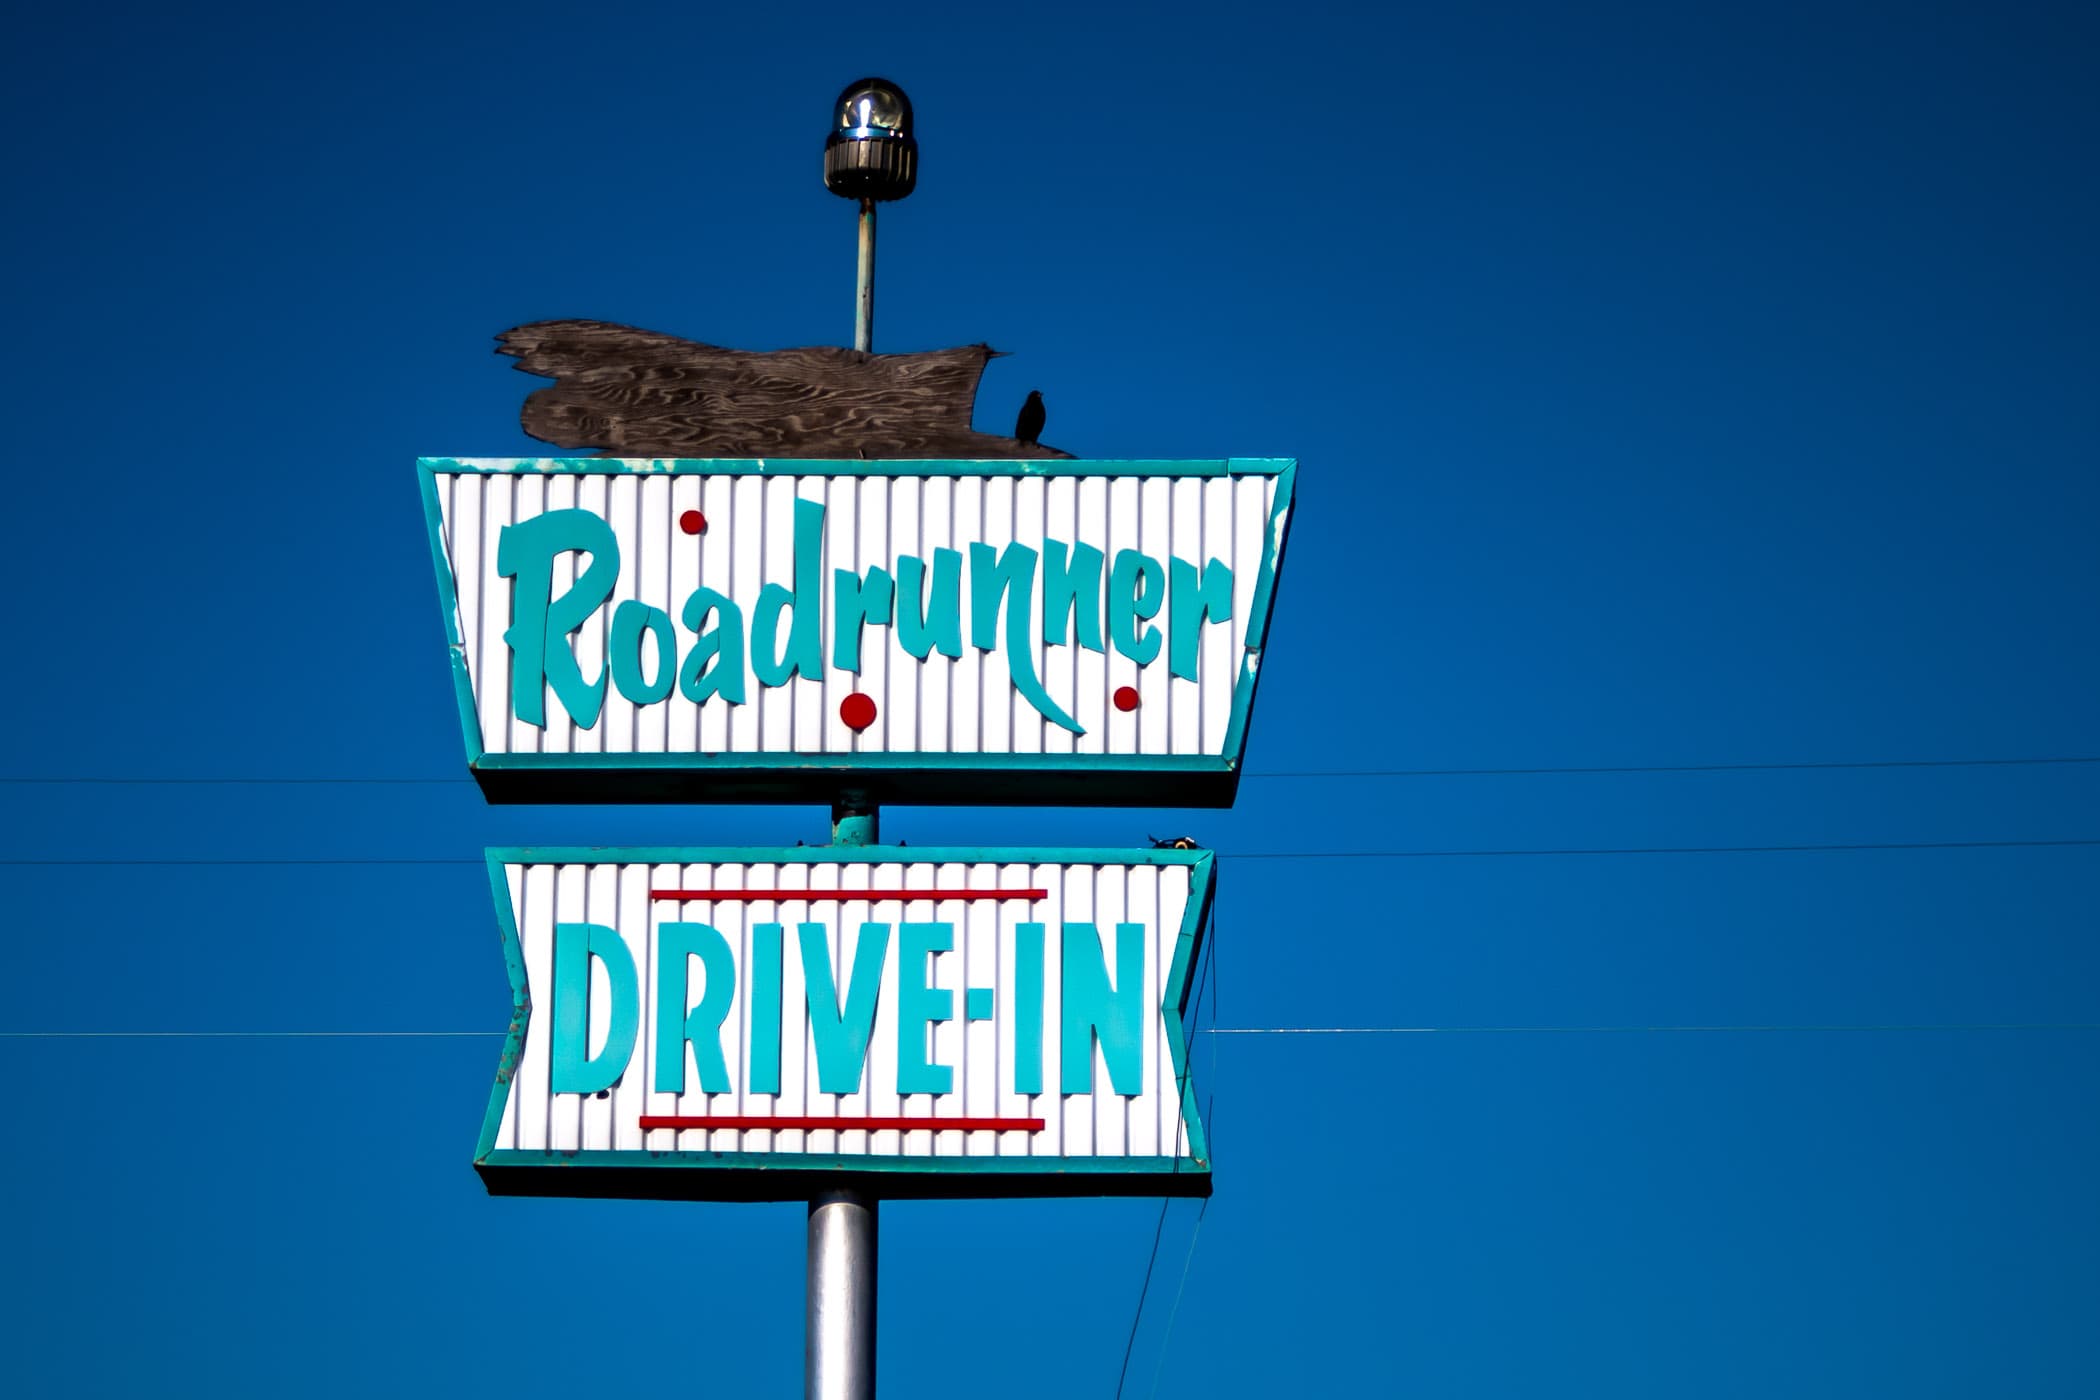 A dilapidated sign for the Roadrunner Drive-In spotted in Adrian, Texas.